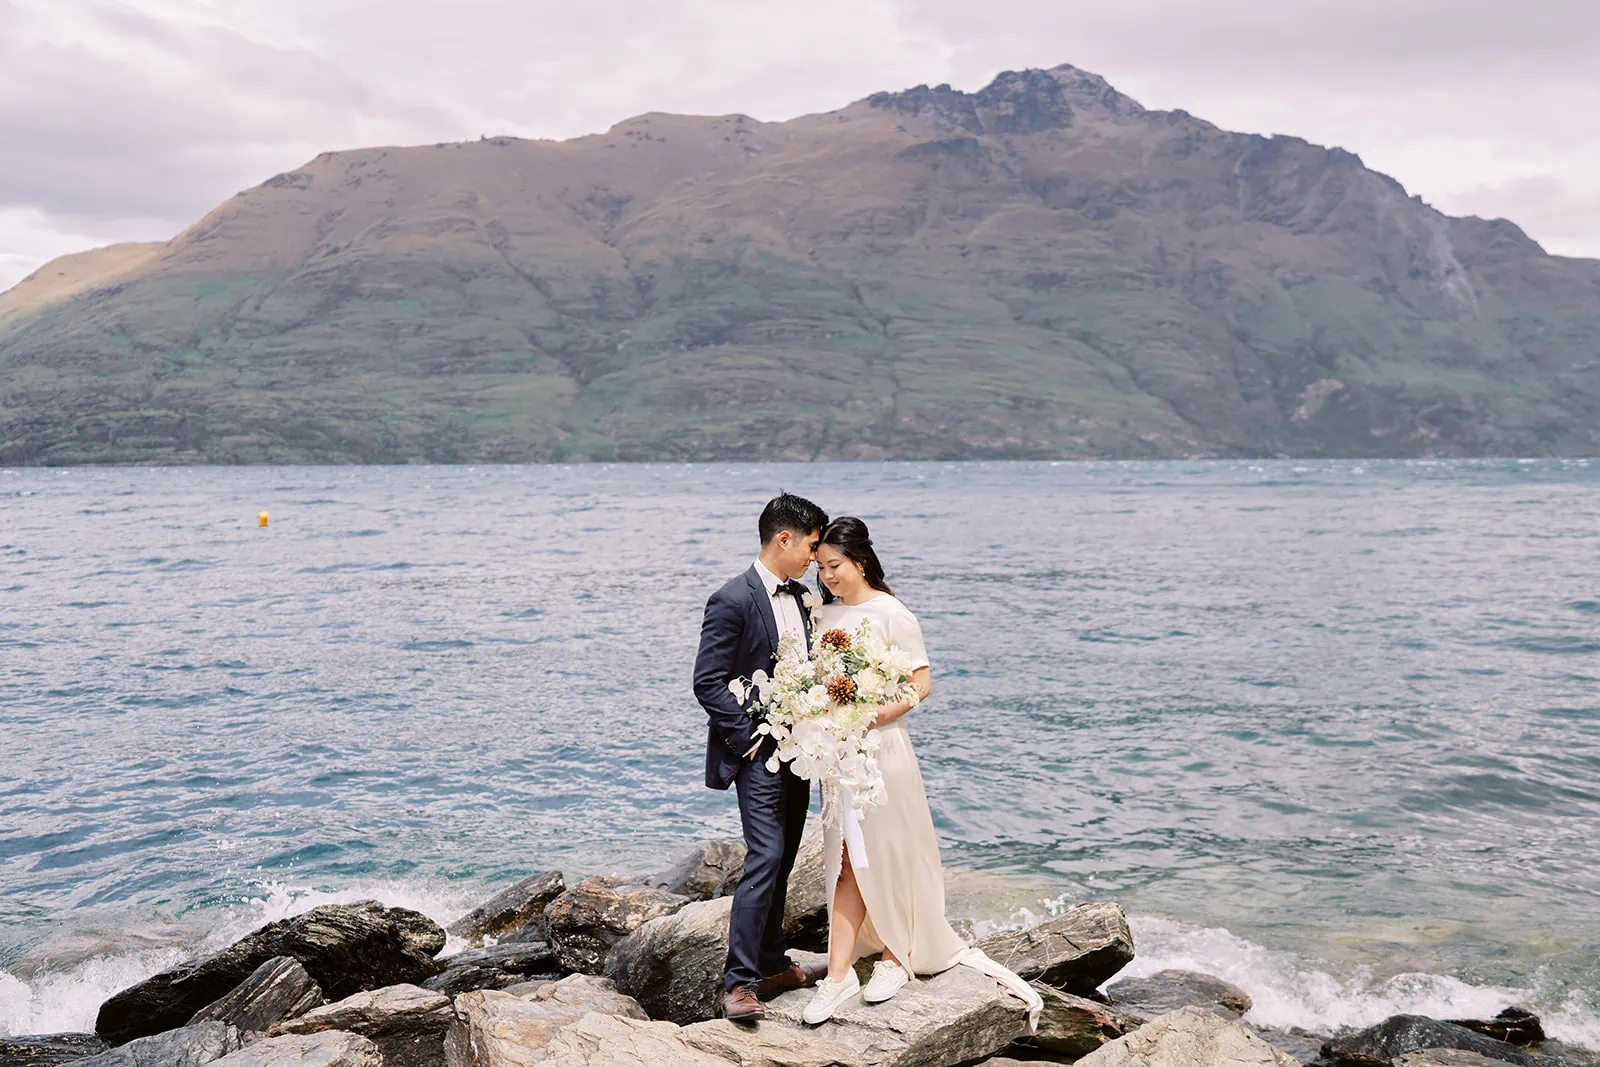 Queenstown Elopement Heli Wedding Photographer クイーンズタウン結婚式 | A man and woman having a pre-wedding photoshoot, standing on rocks by water with mountains in the background.